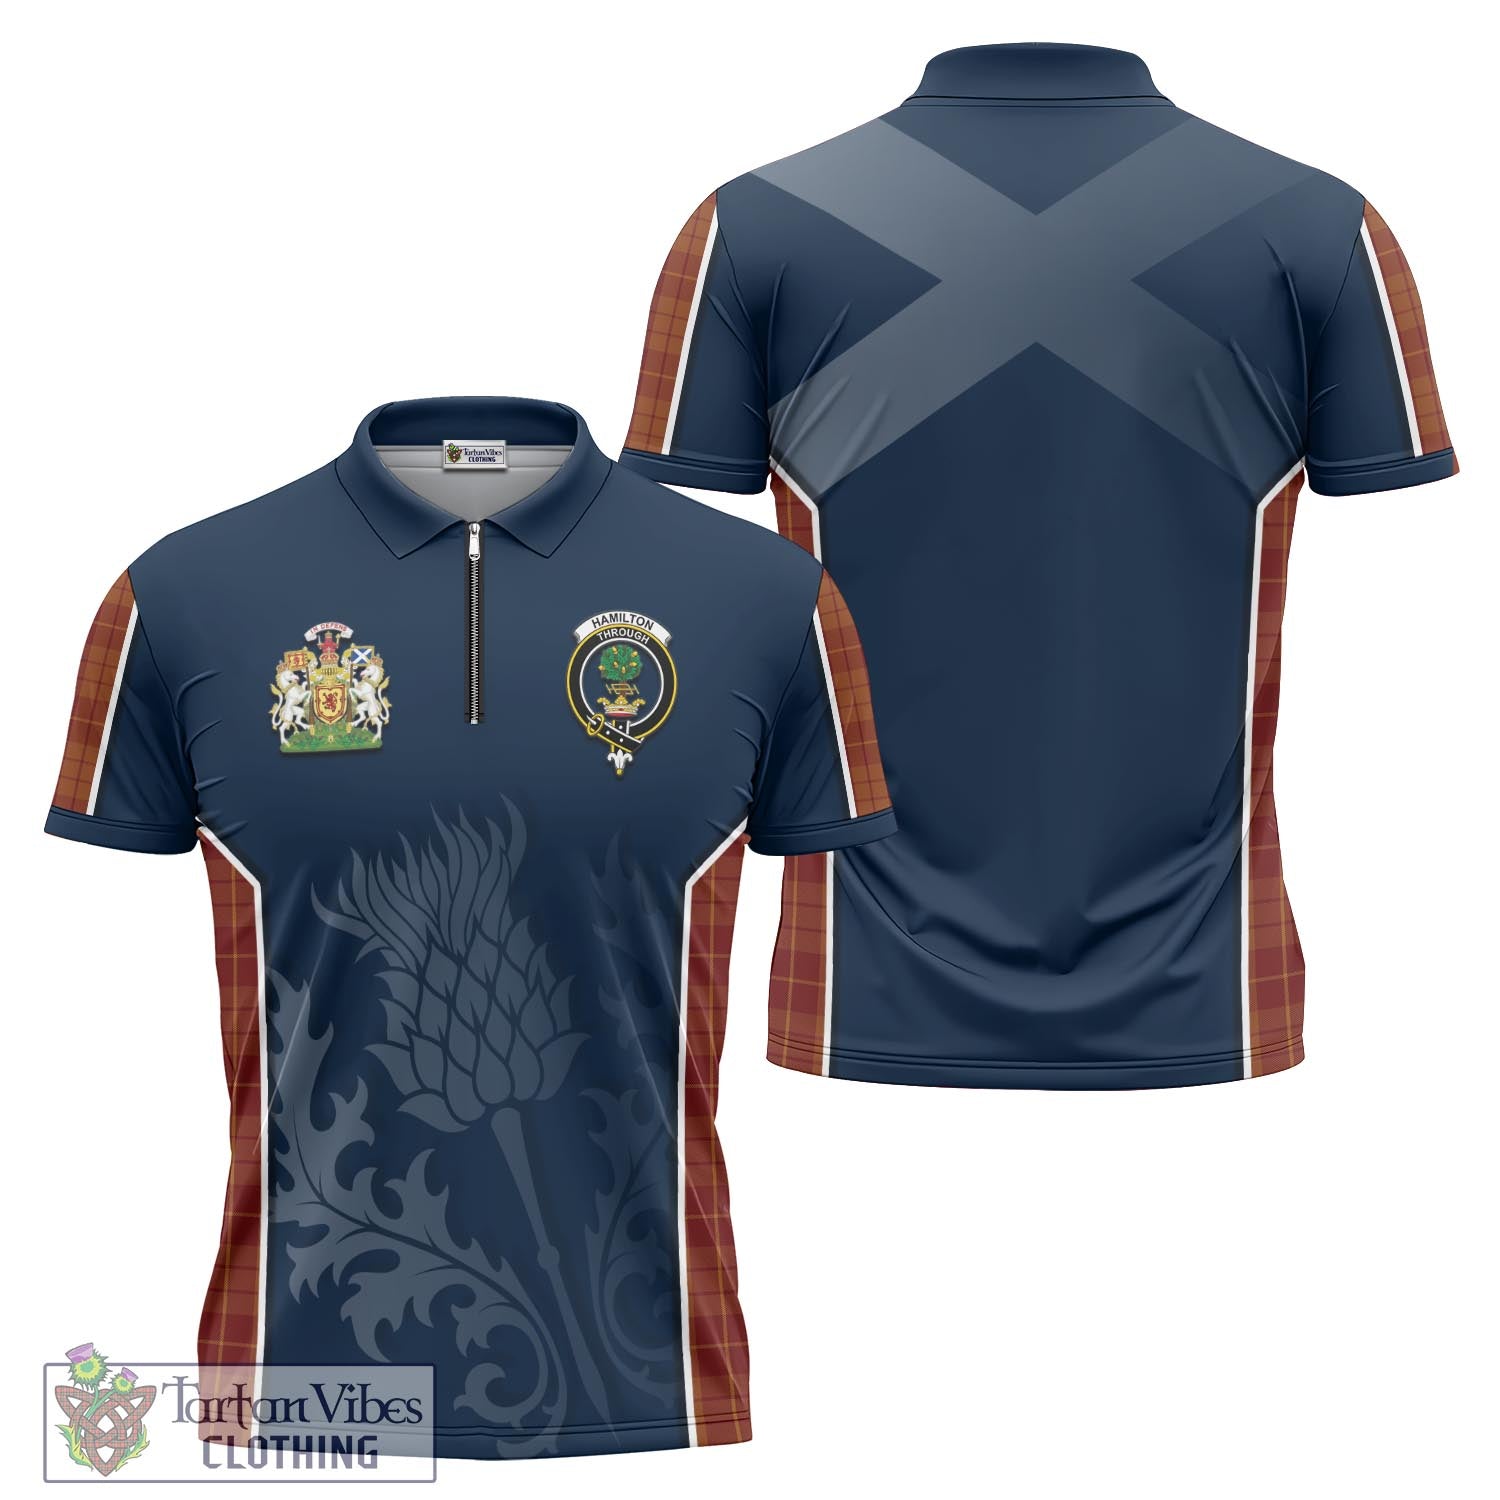 Tartan Vibes Clothing Hamilton Red Tartan Zipper Polo Shirt with Family Crest and Scottish Thistle Vibes Sport Style